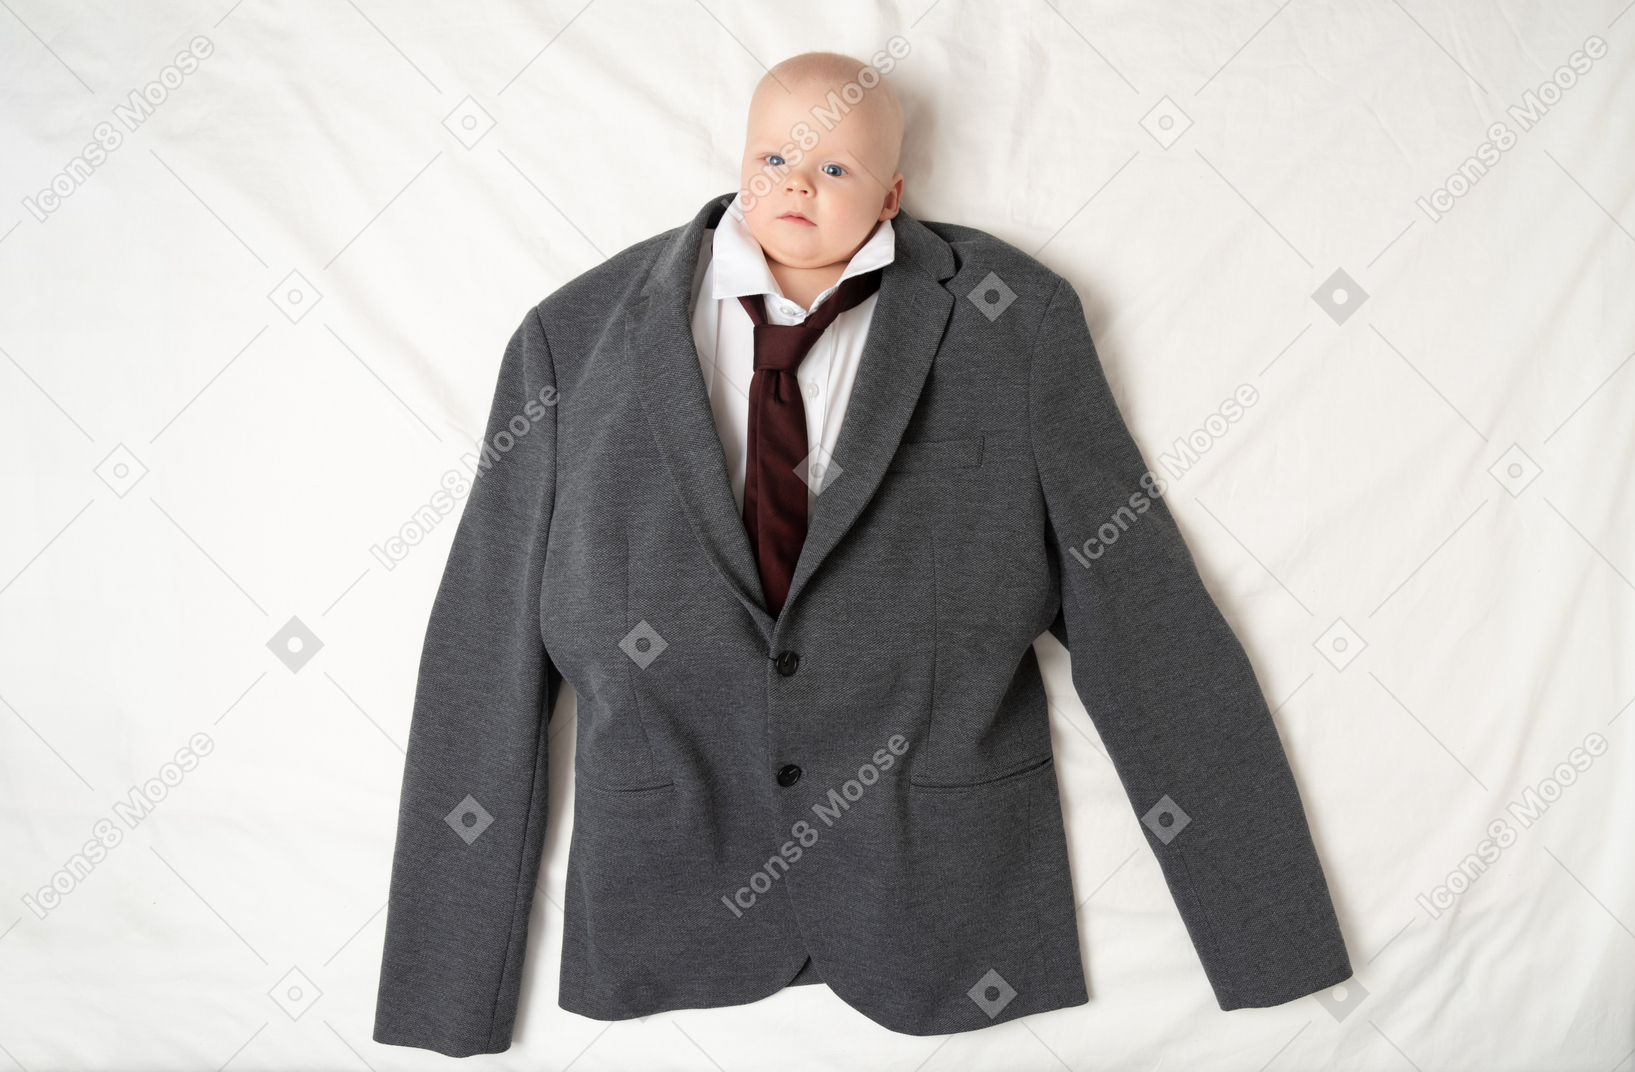 Trying on some father's clothes